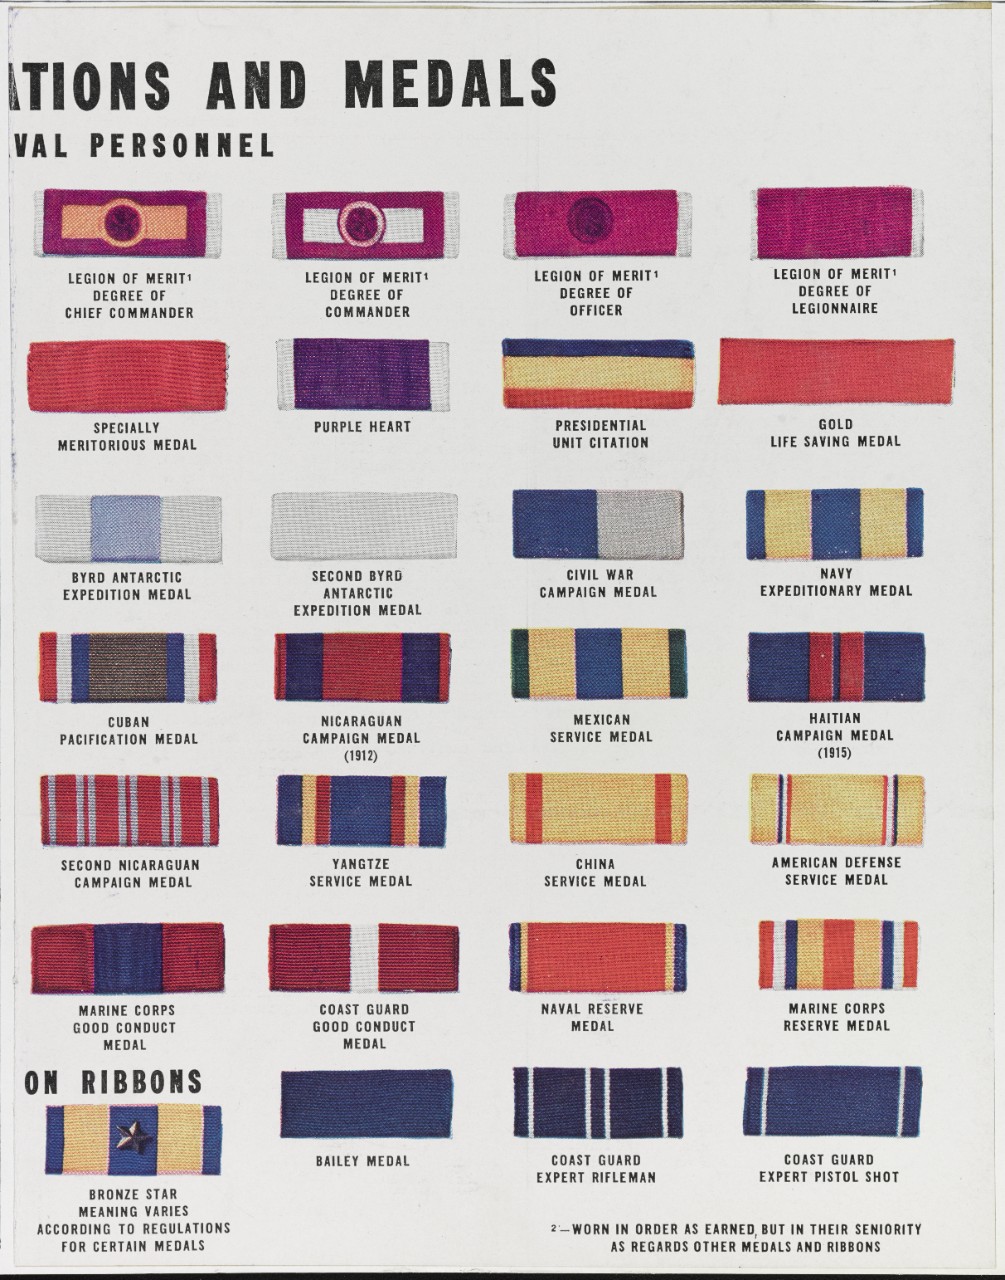 Ribbons of decorations and medals for Naval personnel, as of 1942.